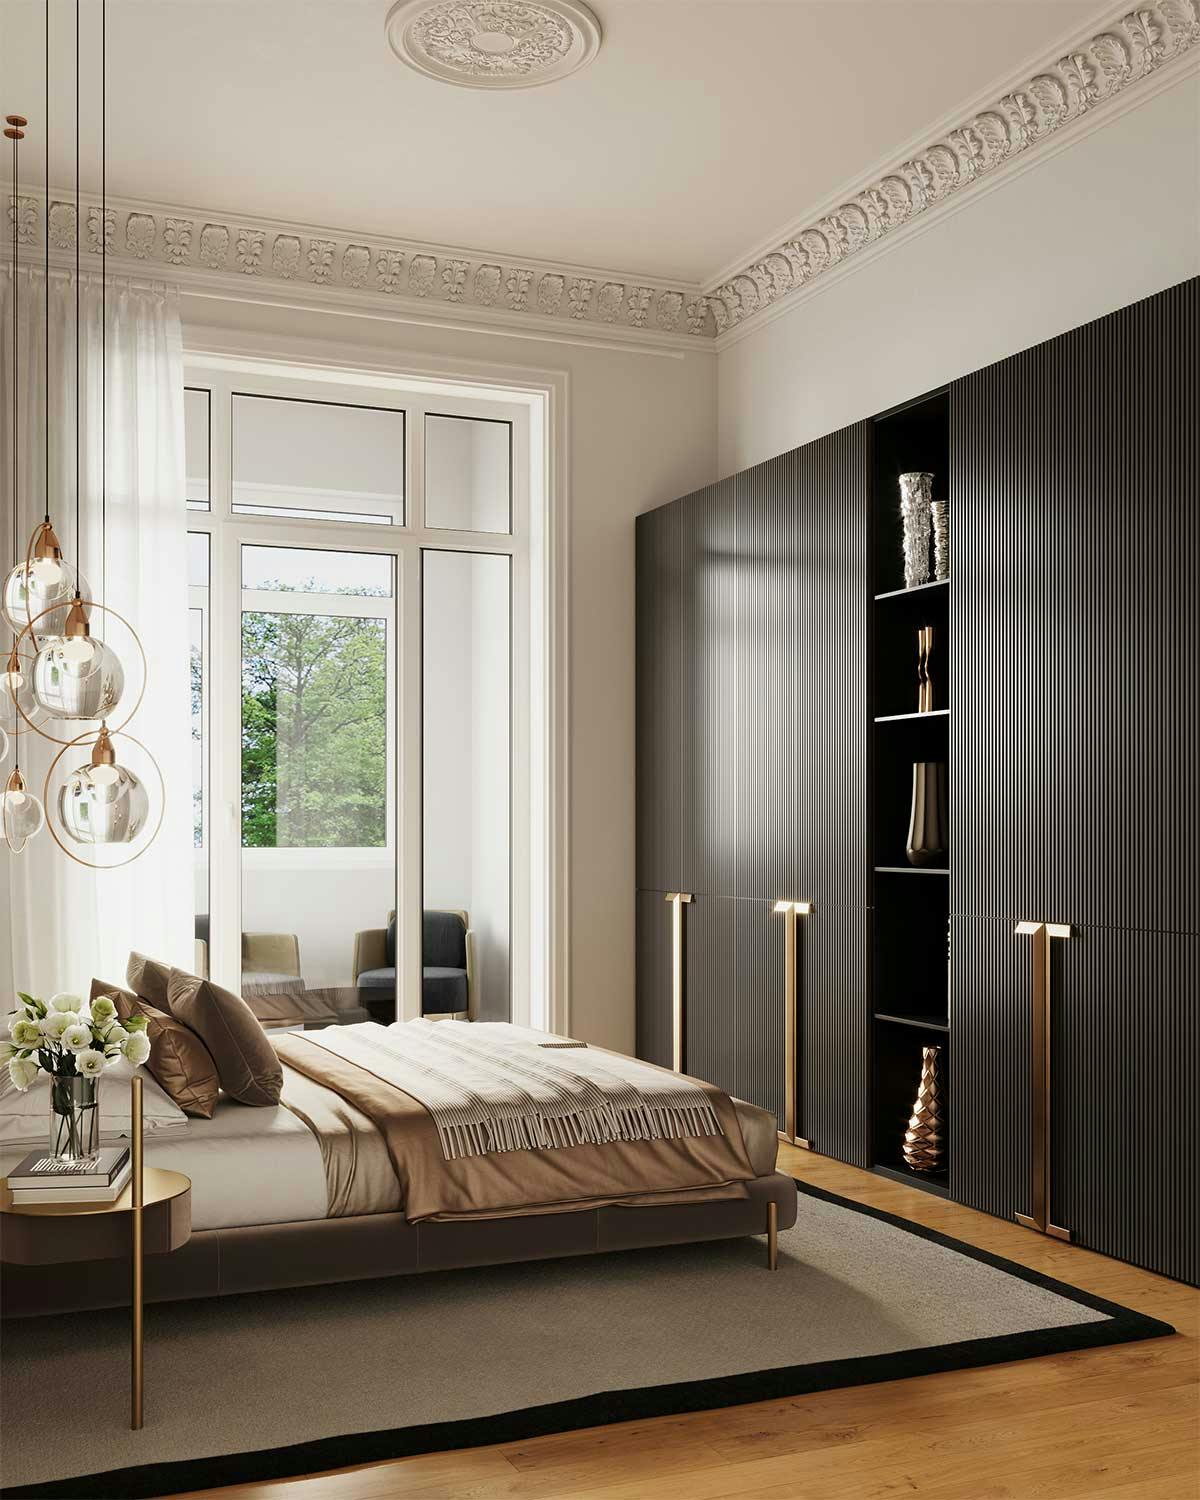 3D Interior Visualization with the design concept of a bedroom in a historic apartment in Hamburg. Image 02